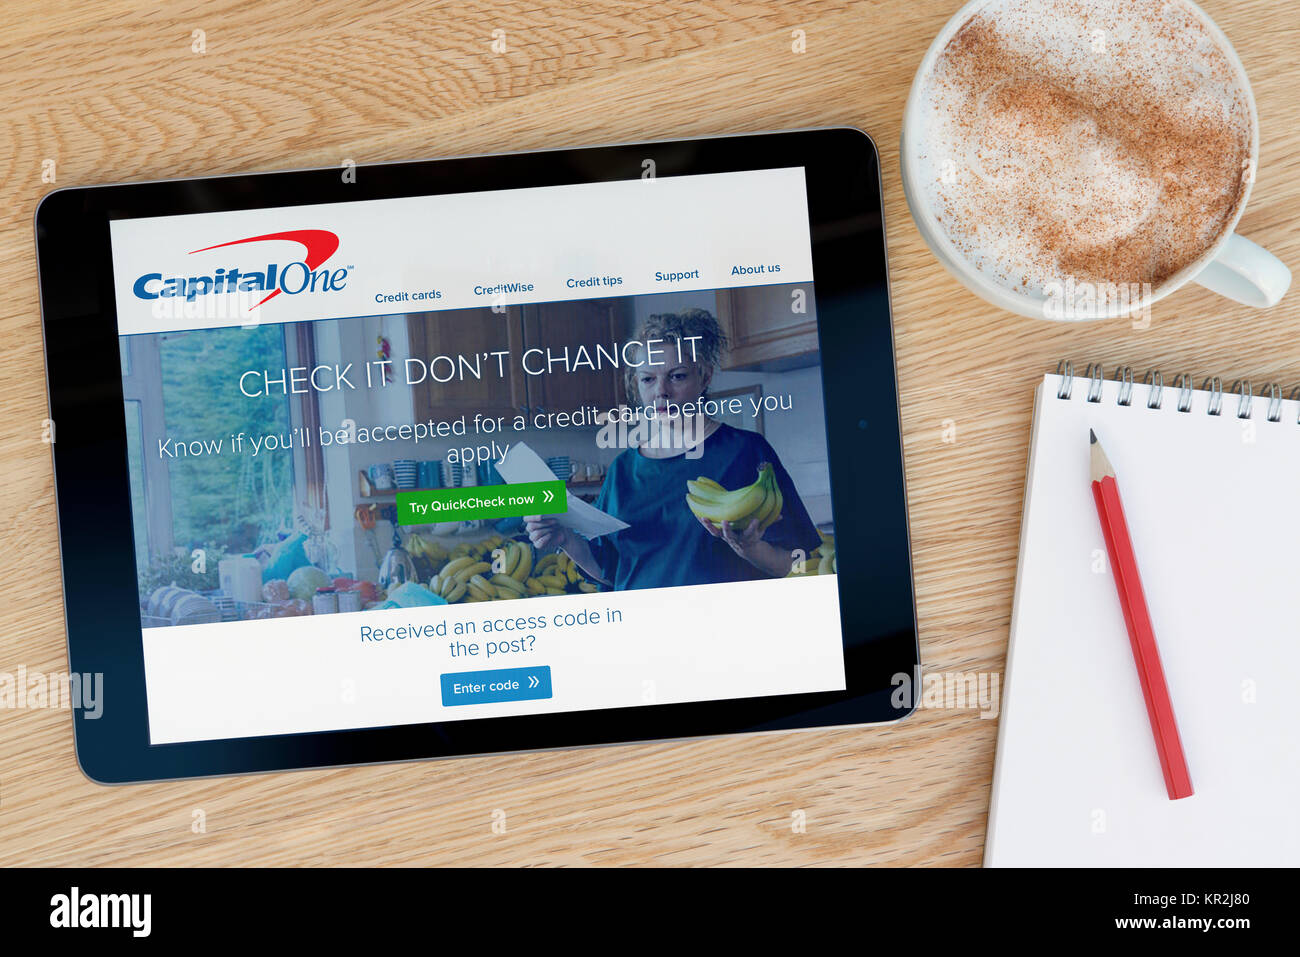 The Capital One website on an iPad tablet device which rests on a wooden table beside a notepad and pencil and a cup of coffee (Editorial only) Stock Photo